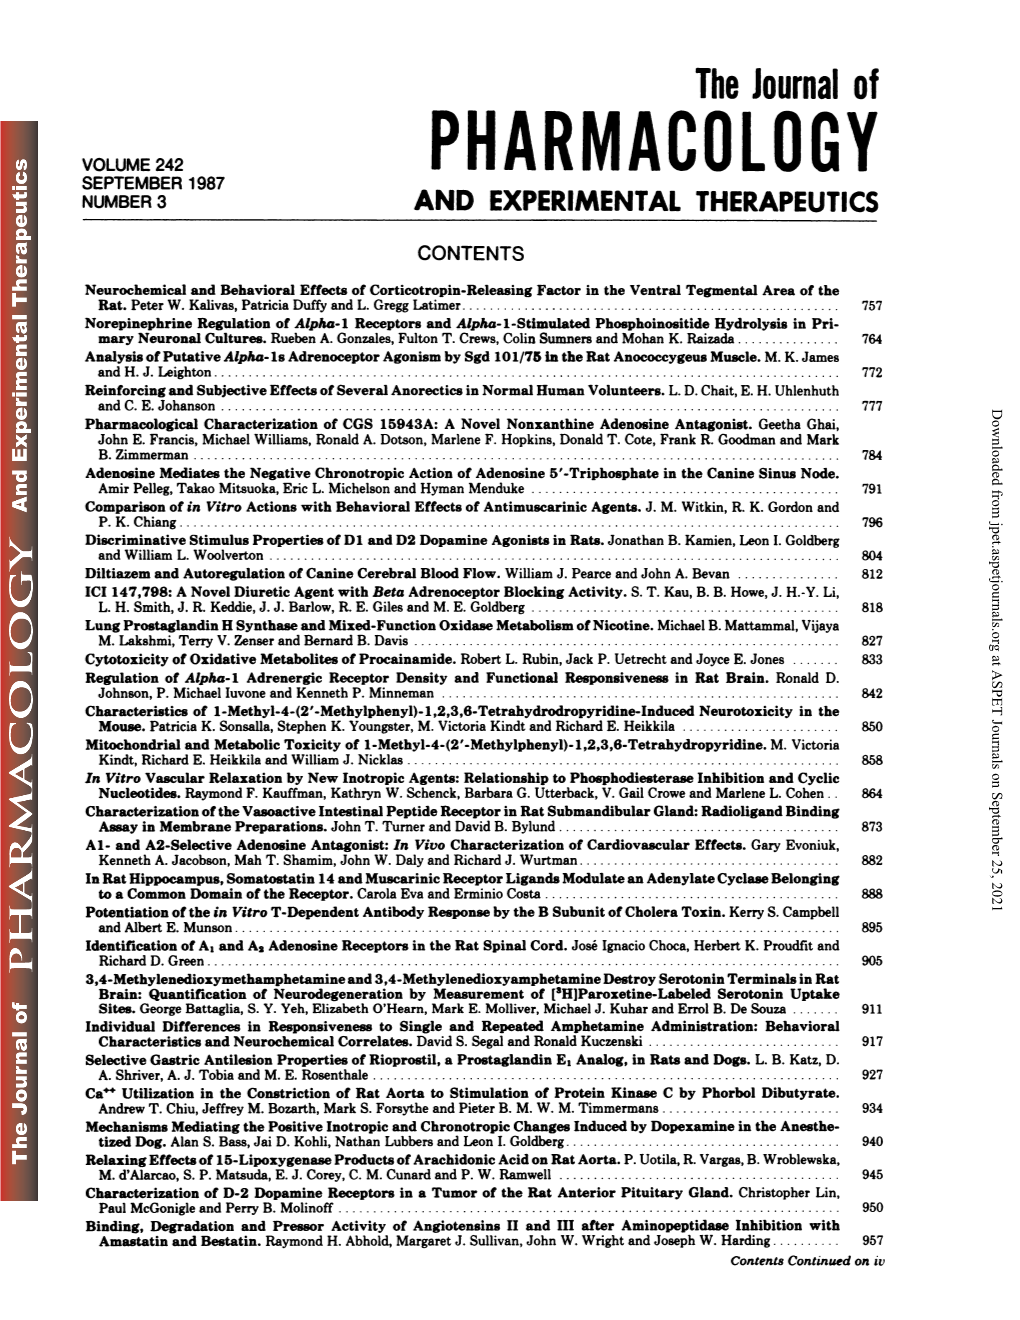 Pharmacology September 1987 Number 3 and Experimental Therapeutics